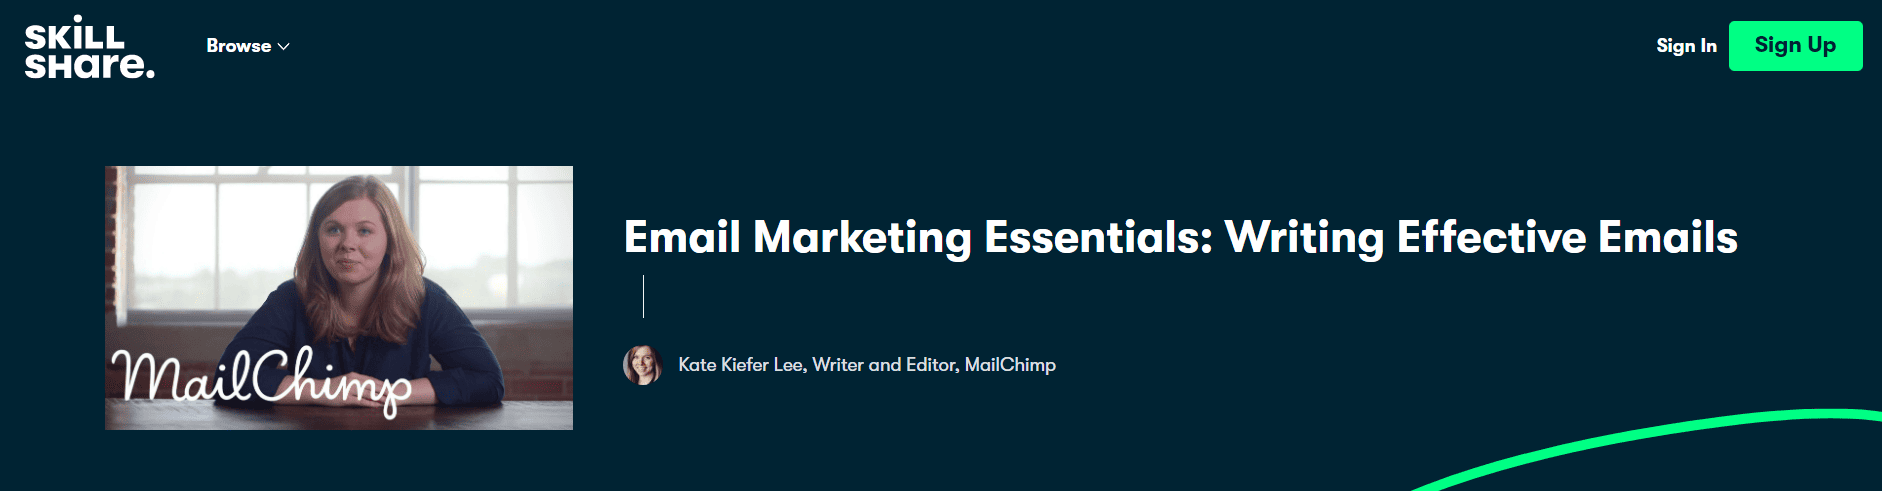 Mailchimp email course on Skillshare